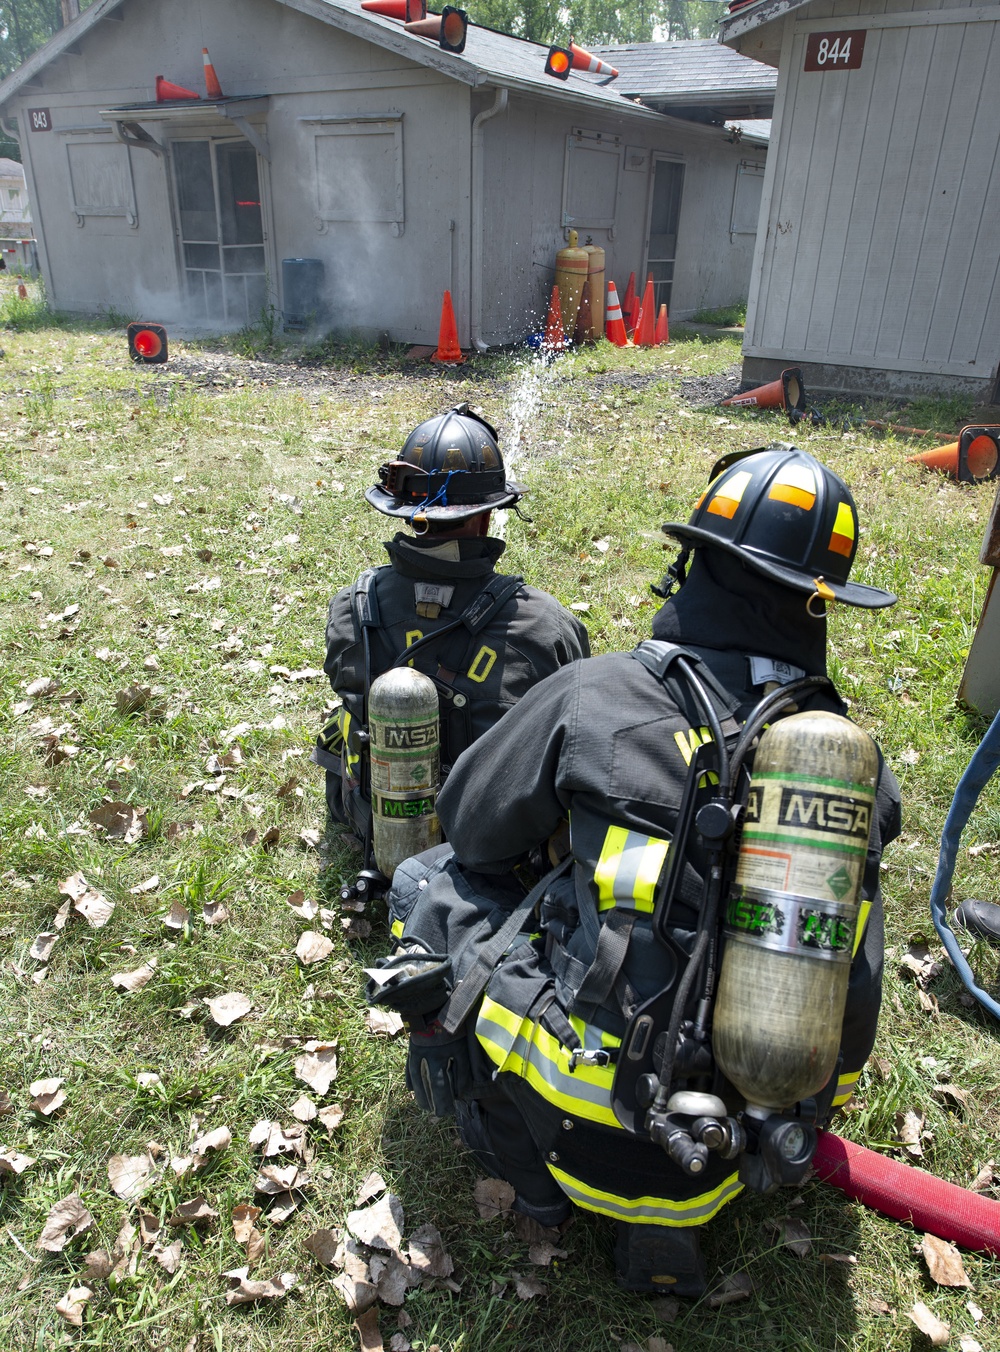 Wright-Patt trains personnel in emergency response